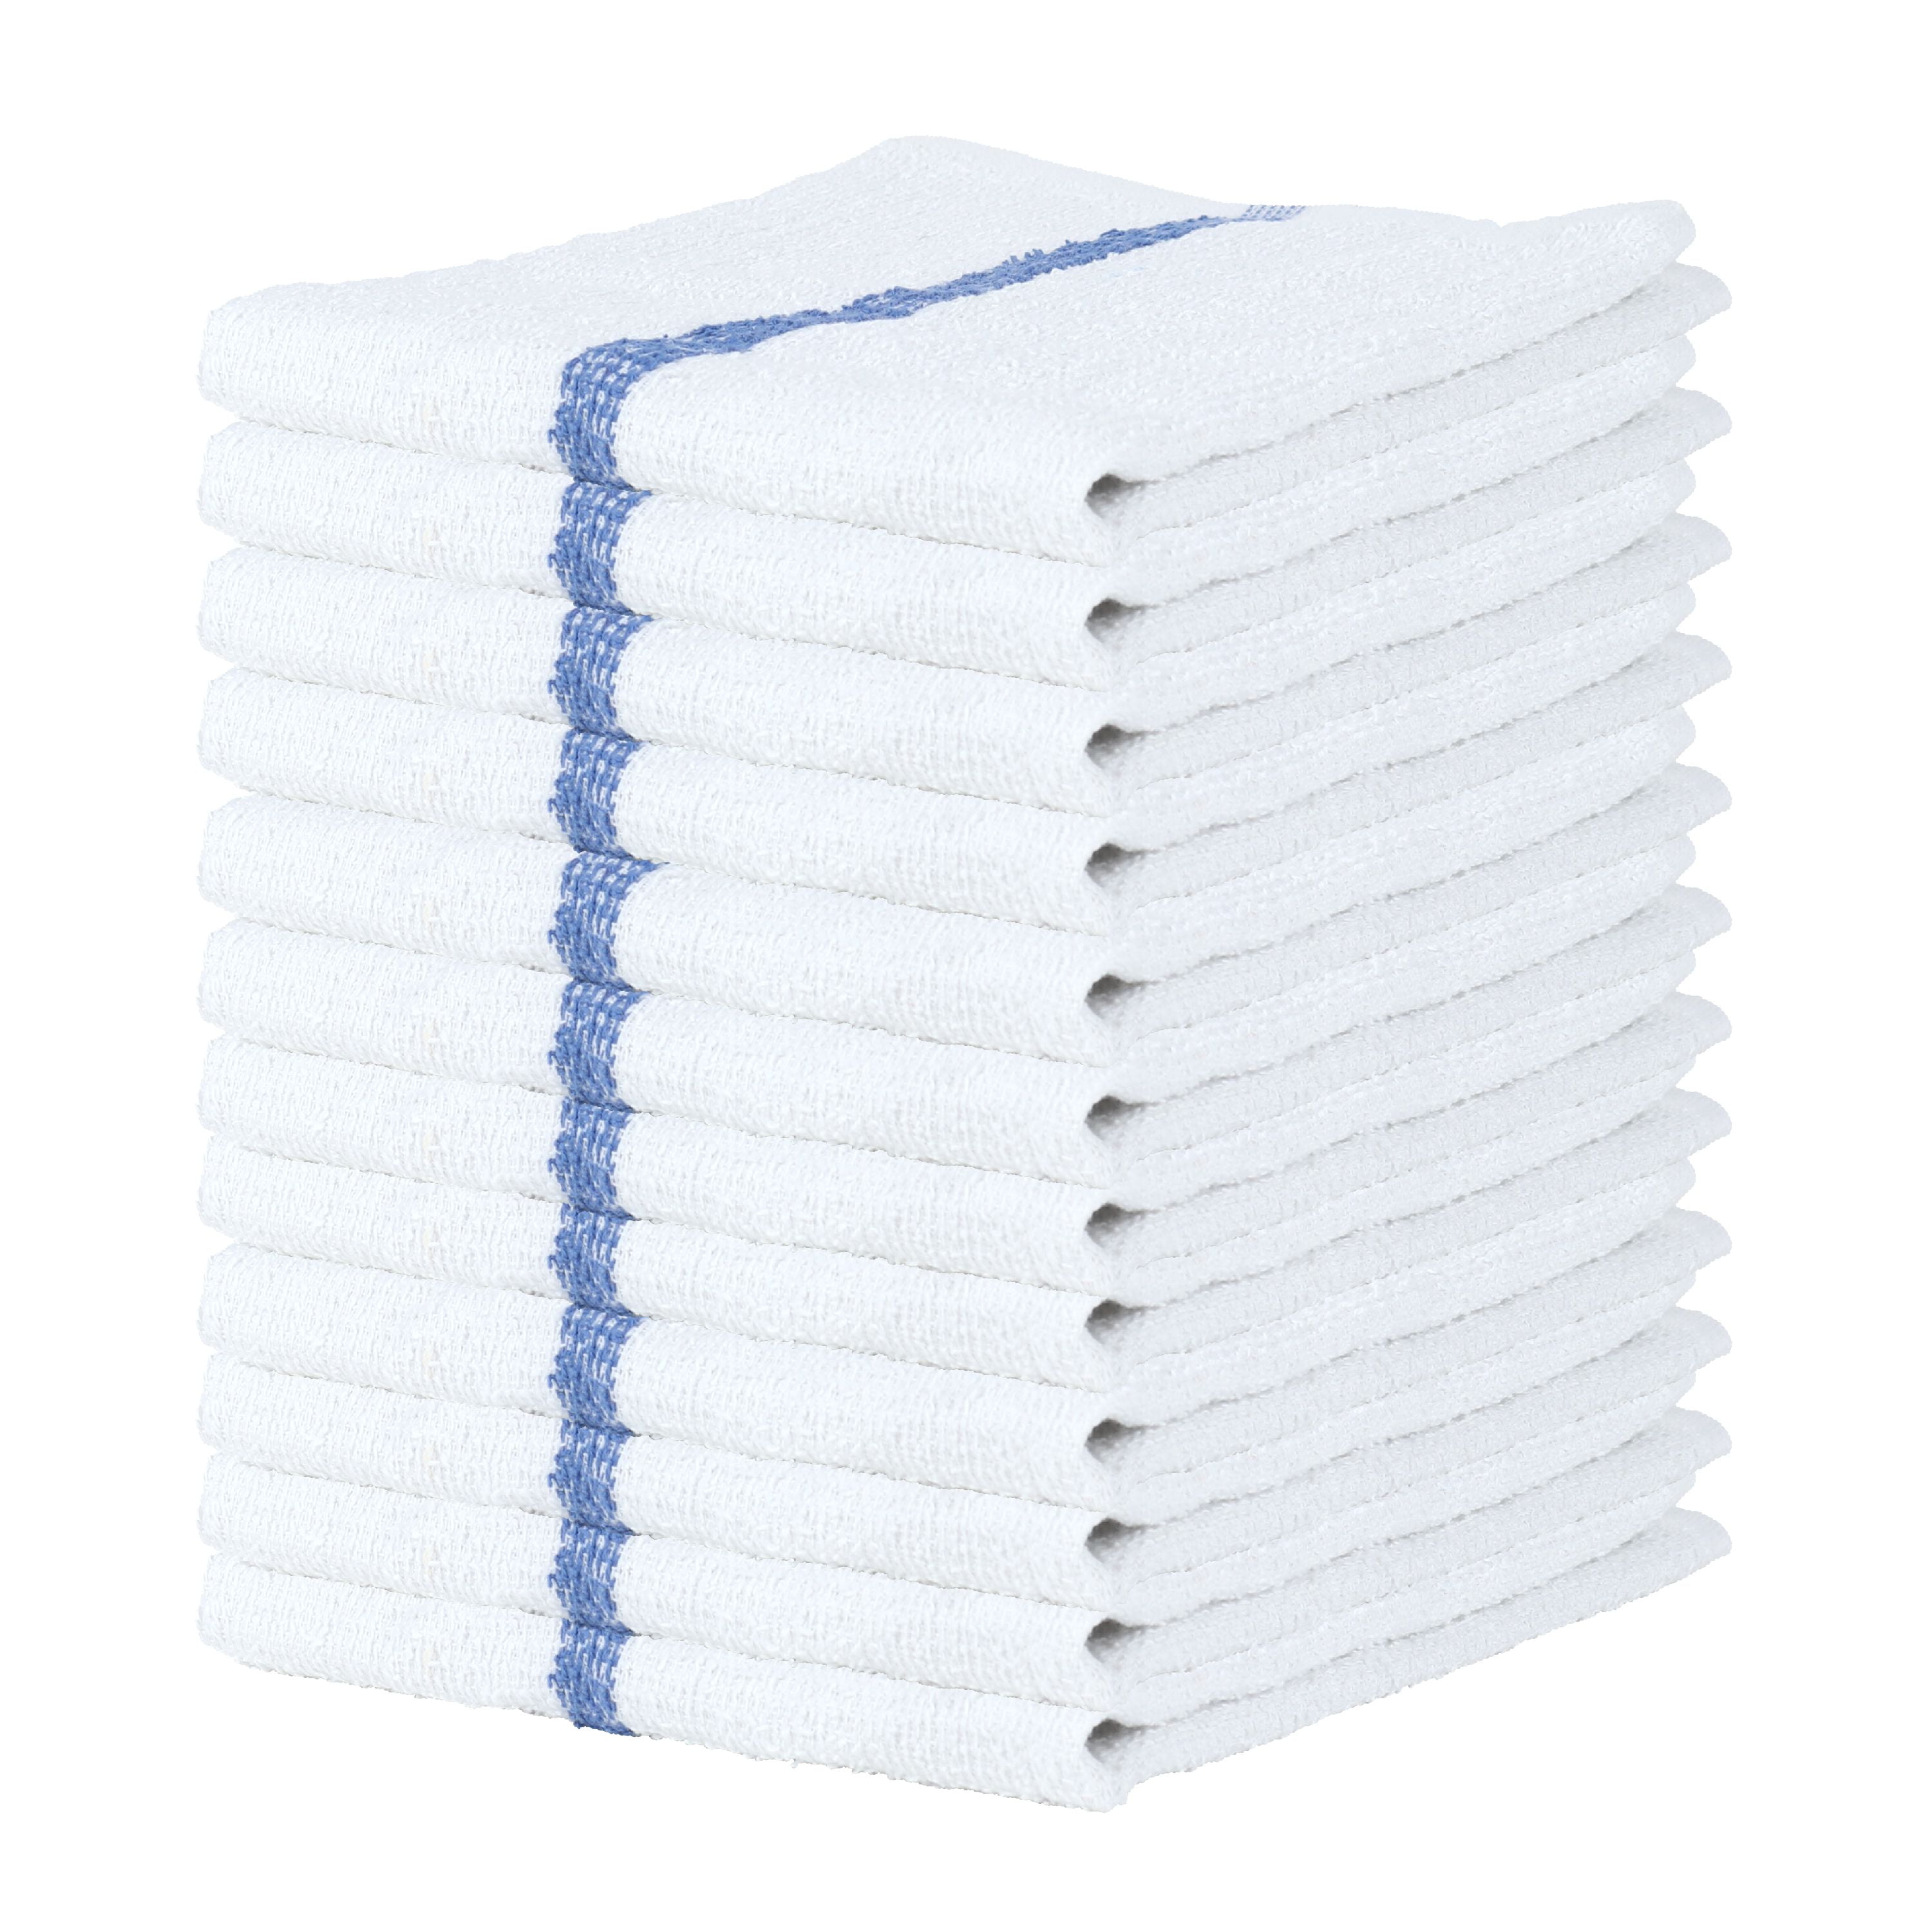 Kitchen Bar Mop Towels 12 Pack 100% Ring Spun Cotton Commercial Grade Quality 